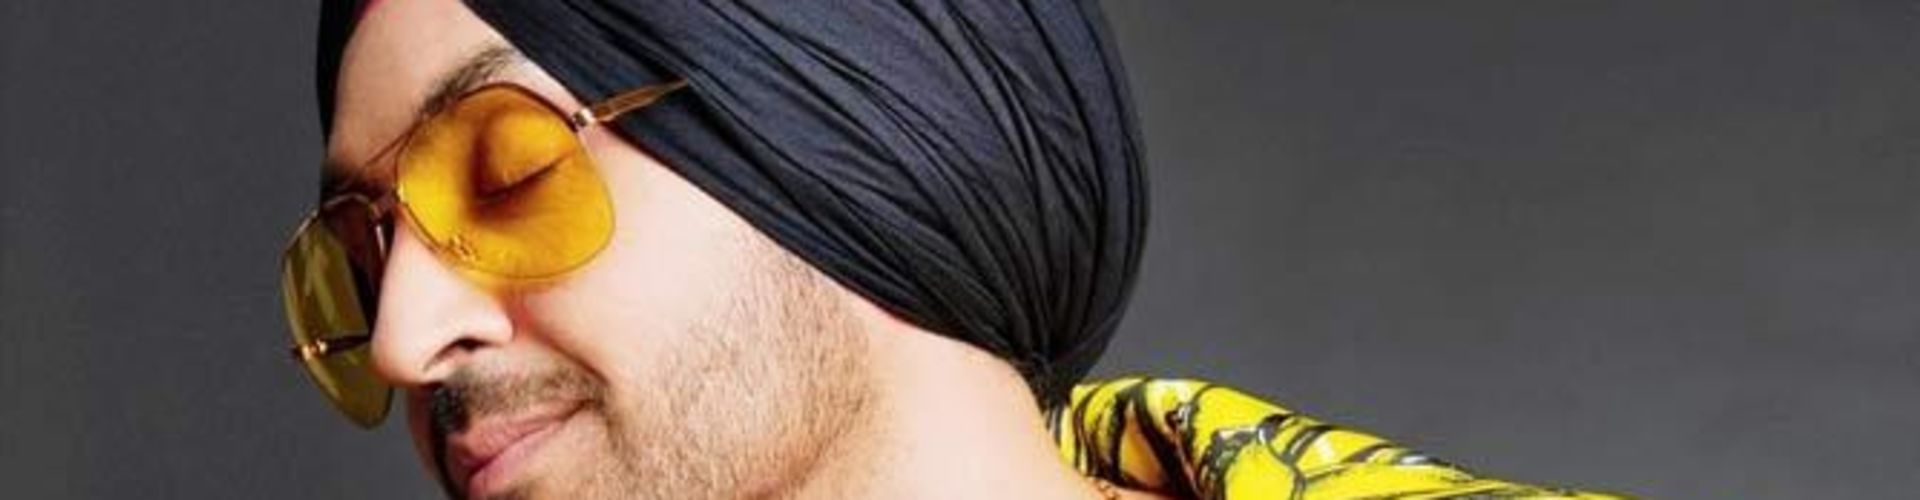 ​Diljit Dosanjh To Get His Wax Statue at Madame Tussauds